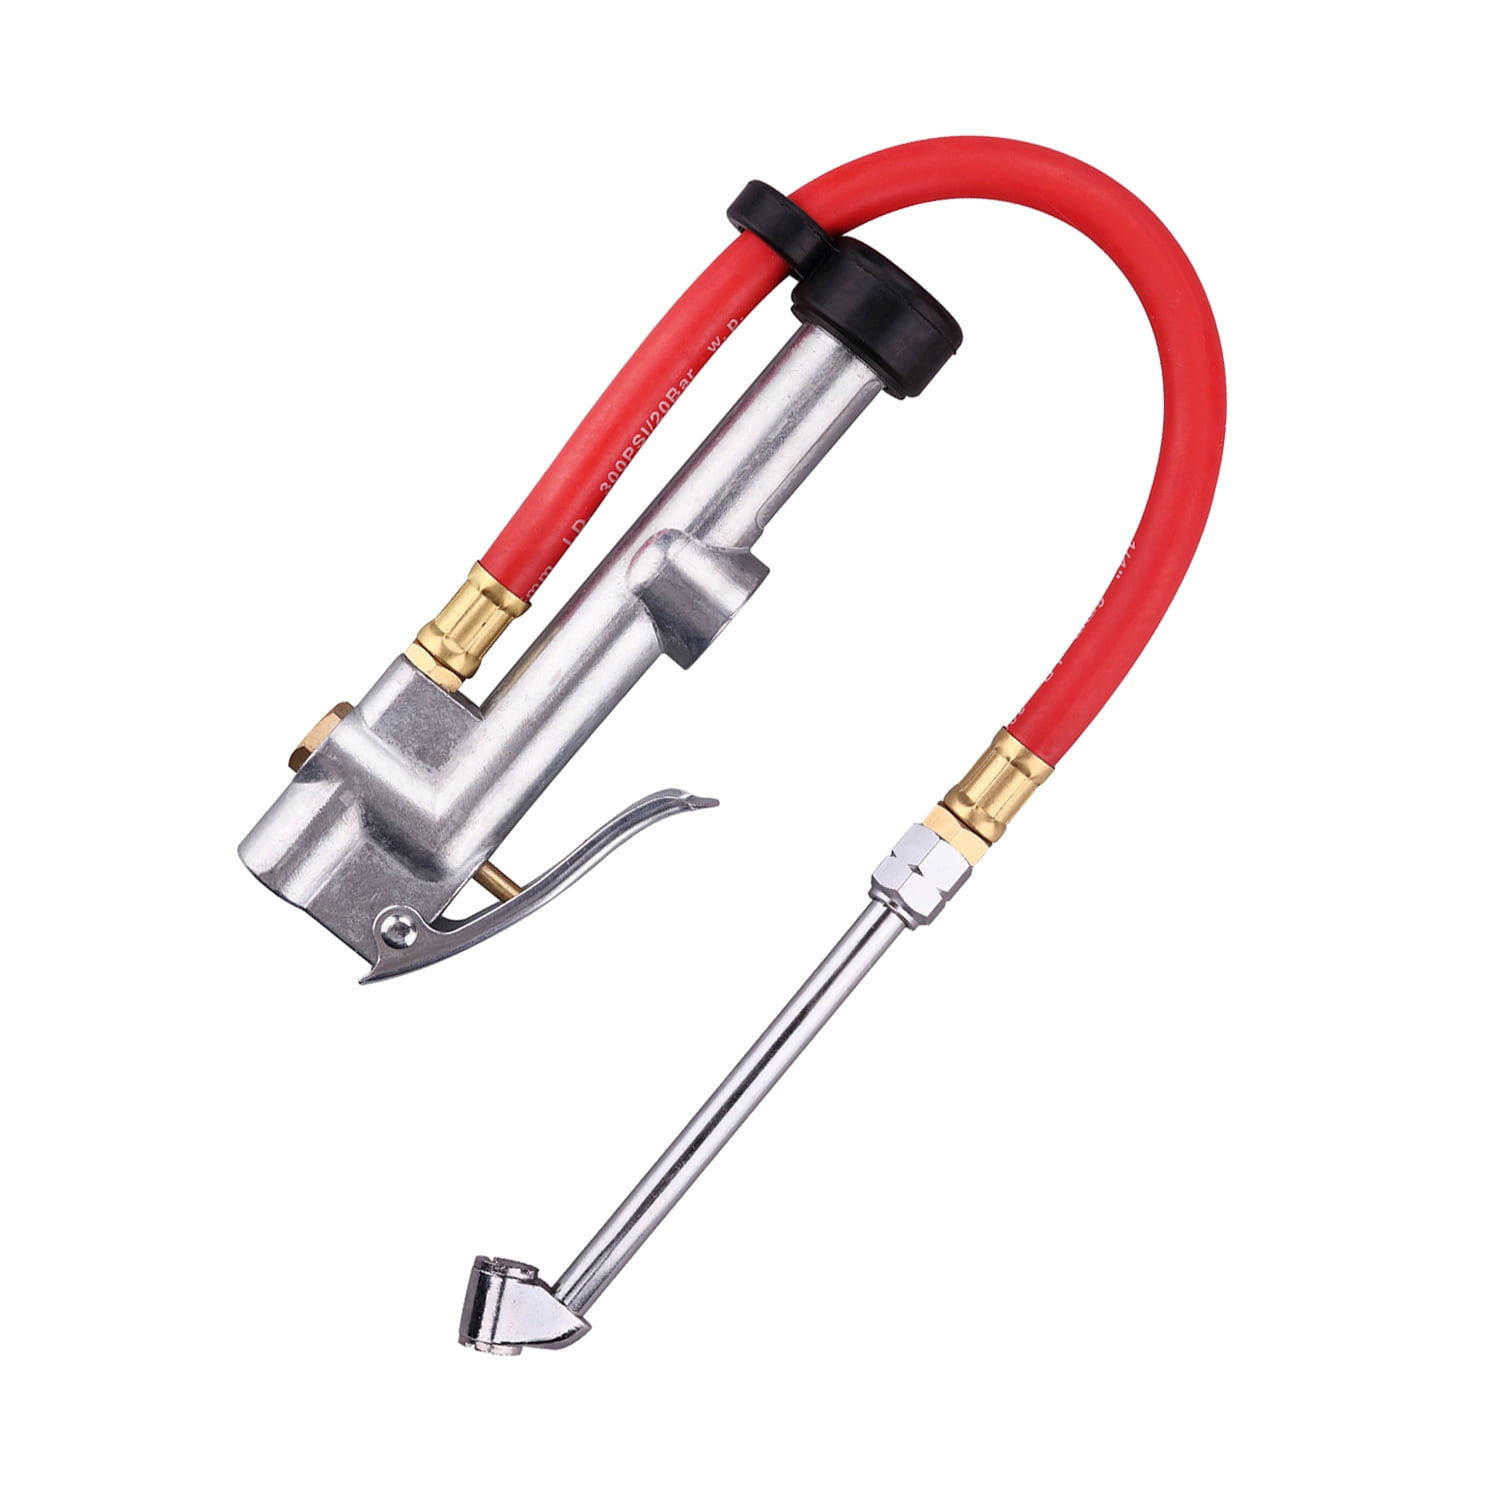 with Heavy Duty Straight Head Air Chuck and 12 Hose 10 to 90 PSI WYNNsky Bayonet Style Tire Inflator Gauge 